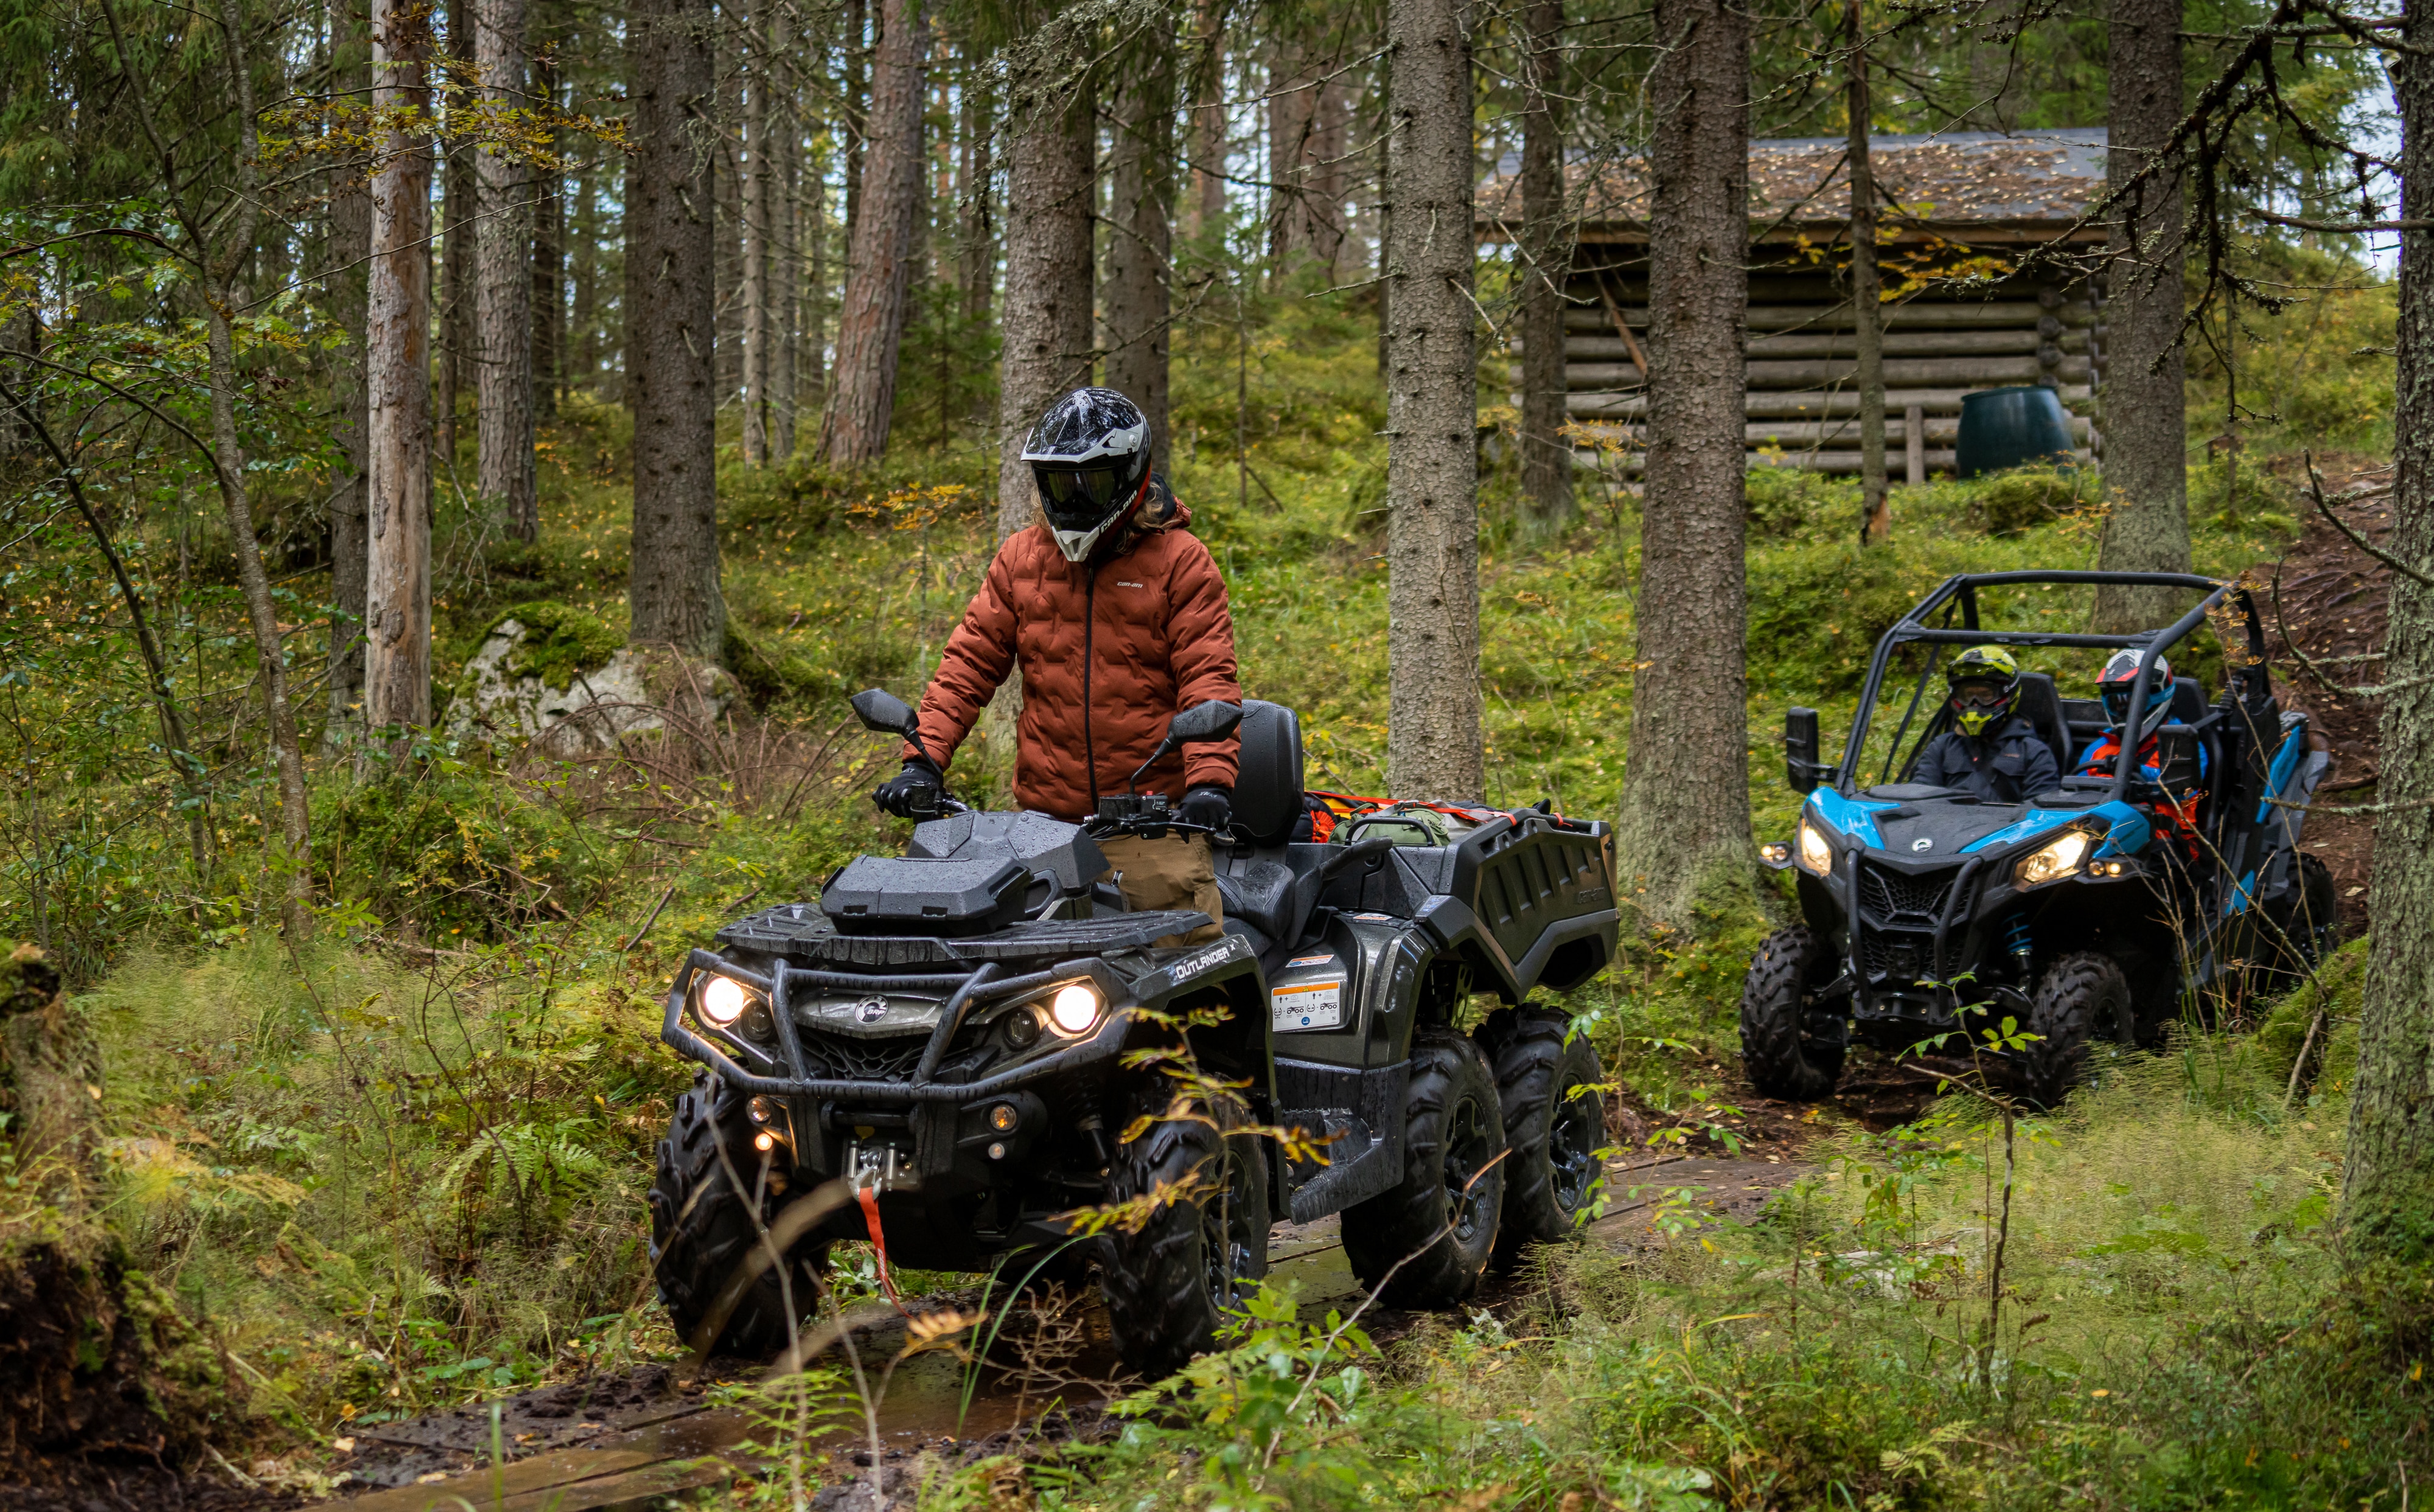 What should I know when riding on different terrain conditions?